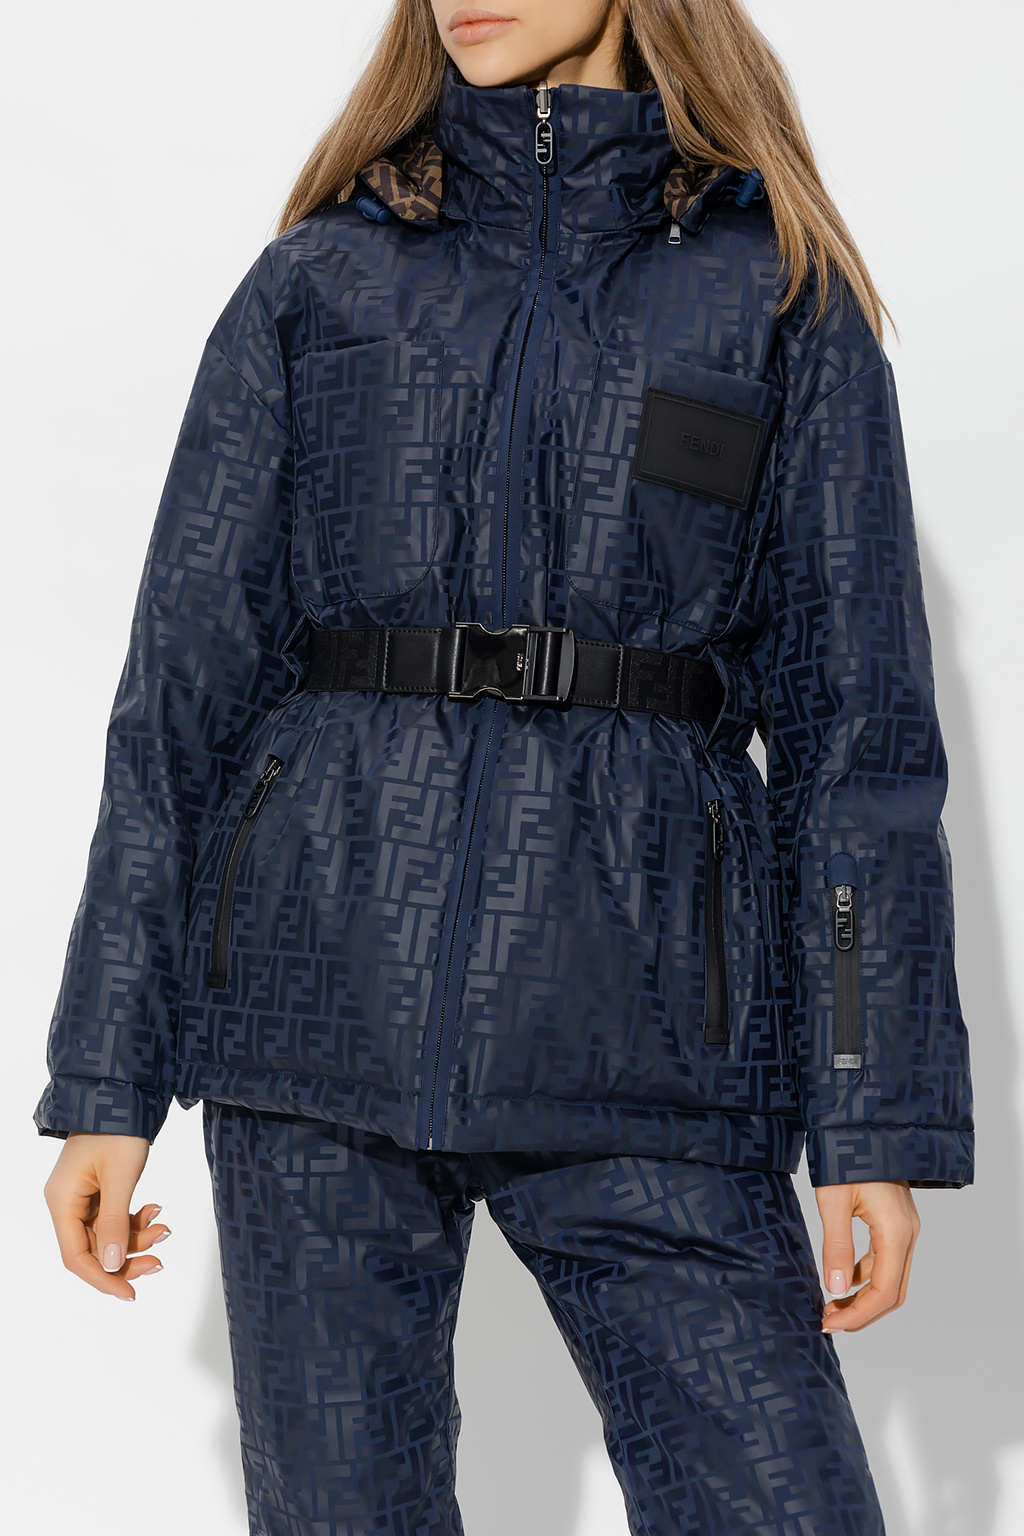 Louis Vuitton Quilted Patch Ski Blouson for Sale in Boston, MA